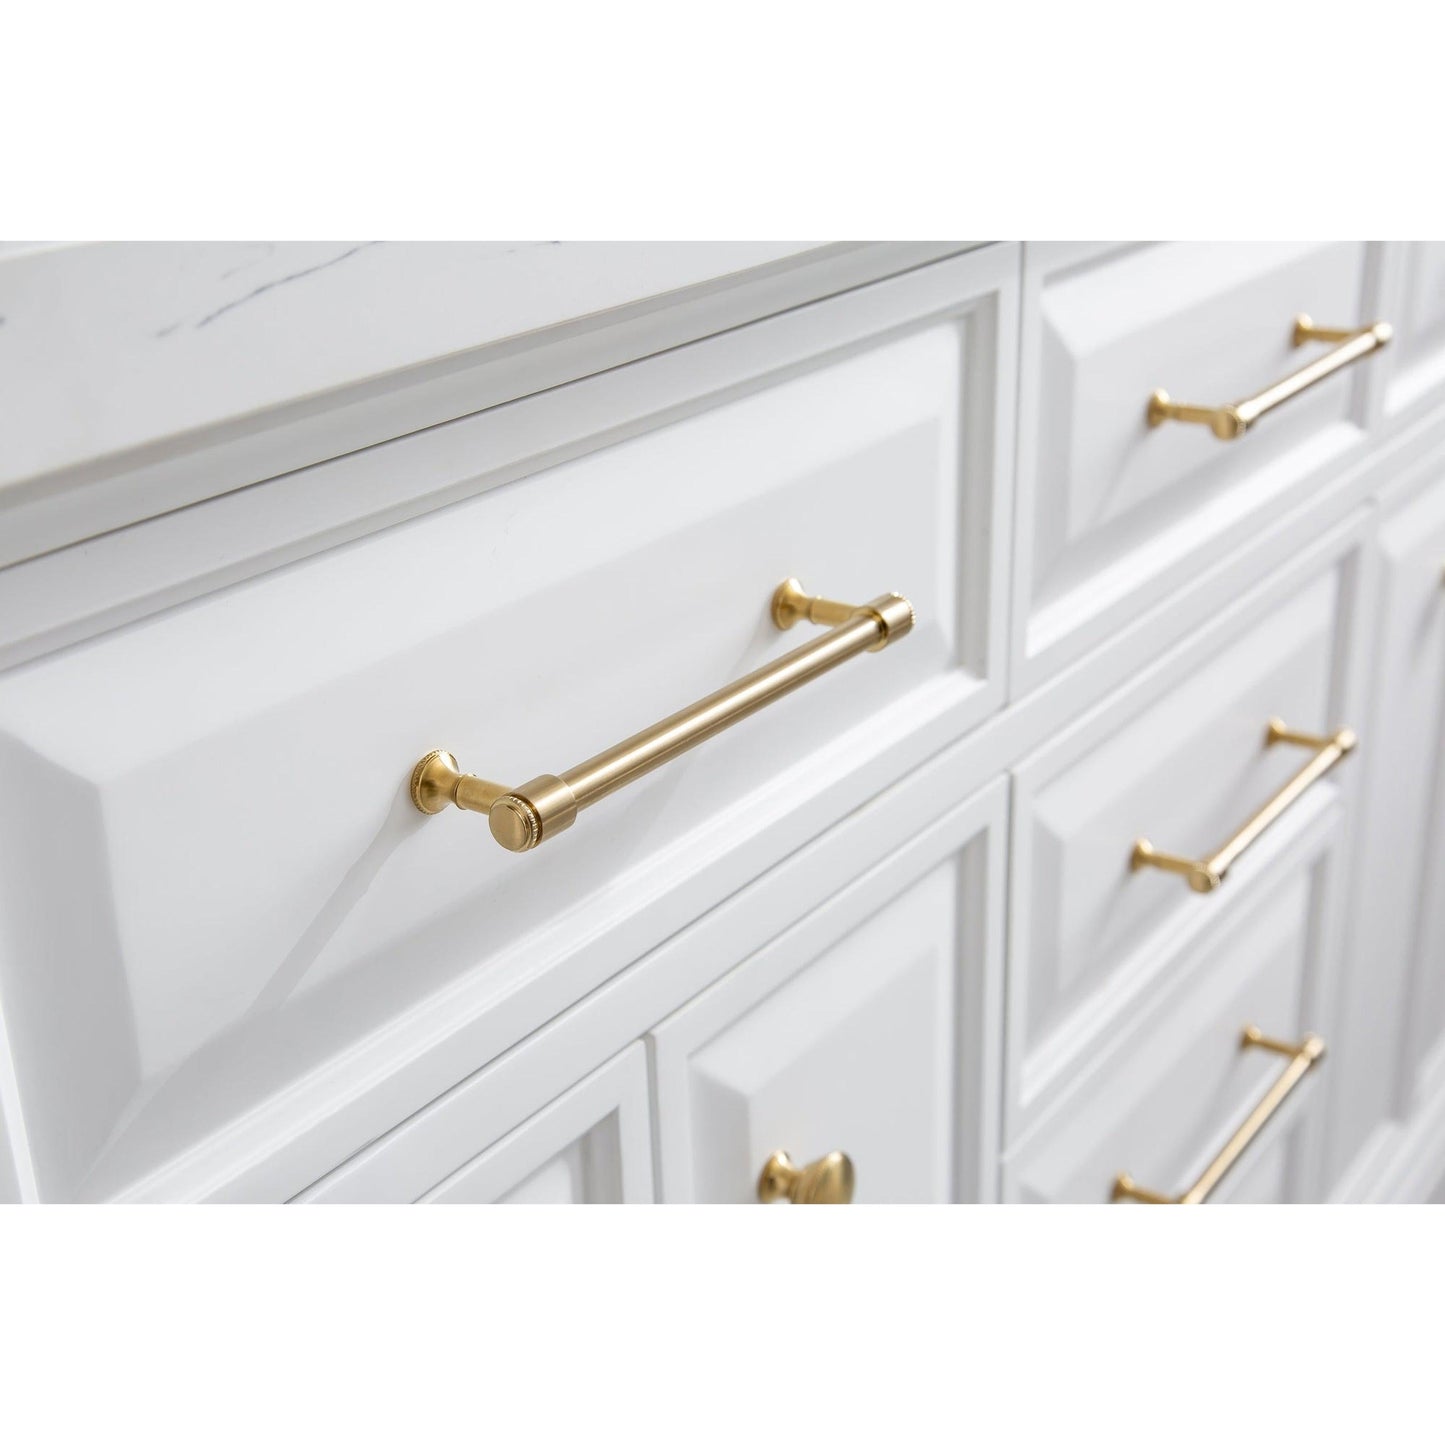 Water Creation Palace 60" Quartz Carrara Pure White Bathroom Vanity Set With Hardware in Satin Gold Finish And Only Mirrors in Chrome Finish